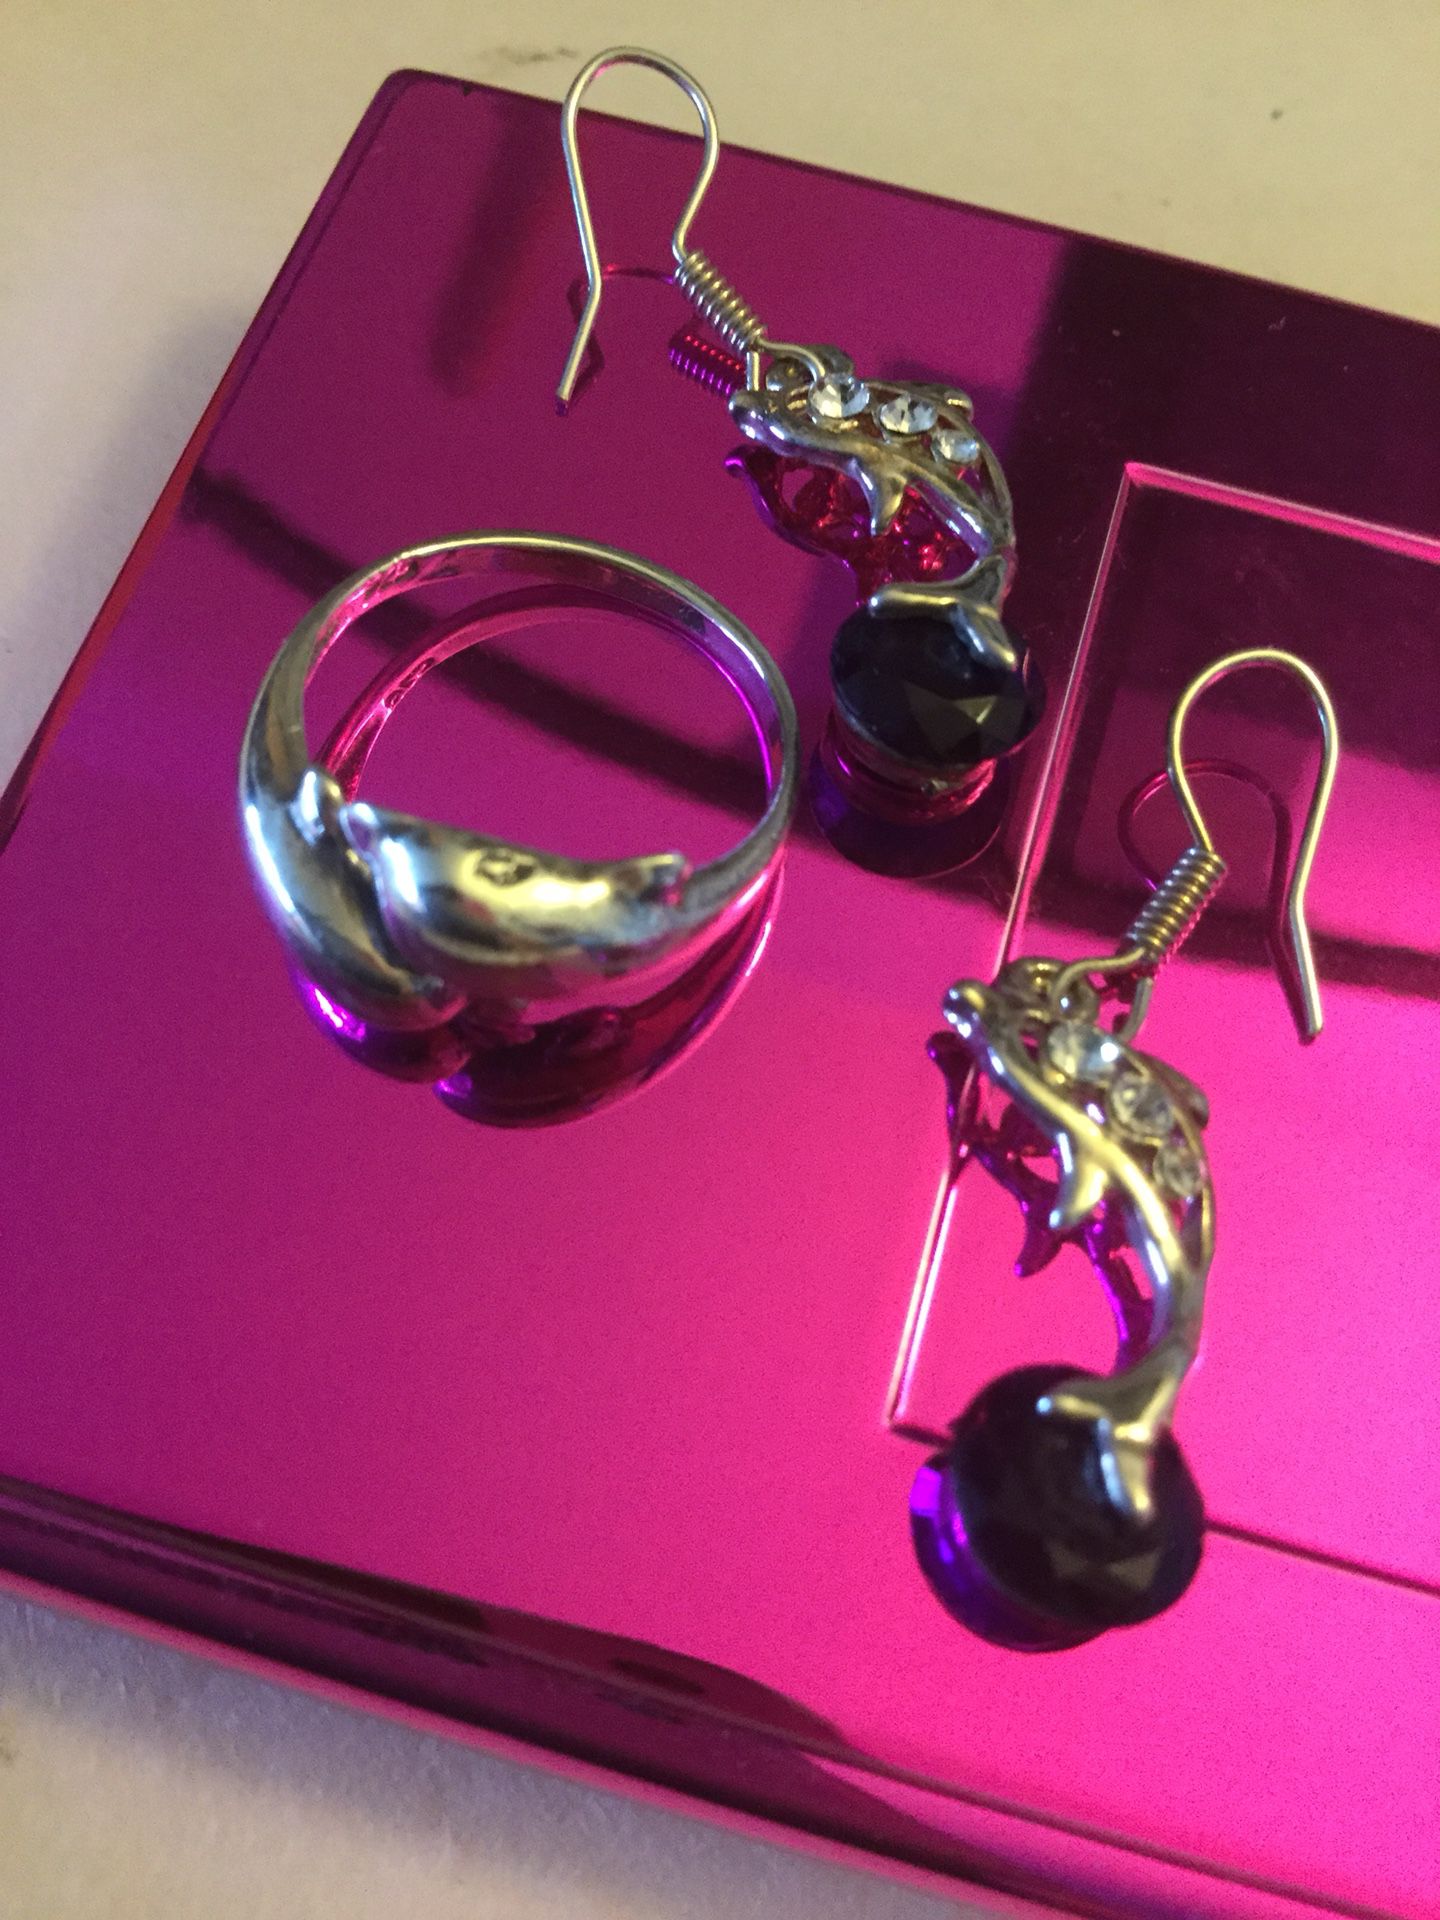 Beautiful Dolphin Ring 🐬 Sterling Silver jewelry Dolphin earrings 🐬 more silver jewelry come visit ! each priced separately $25